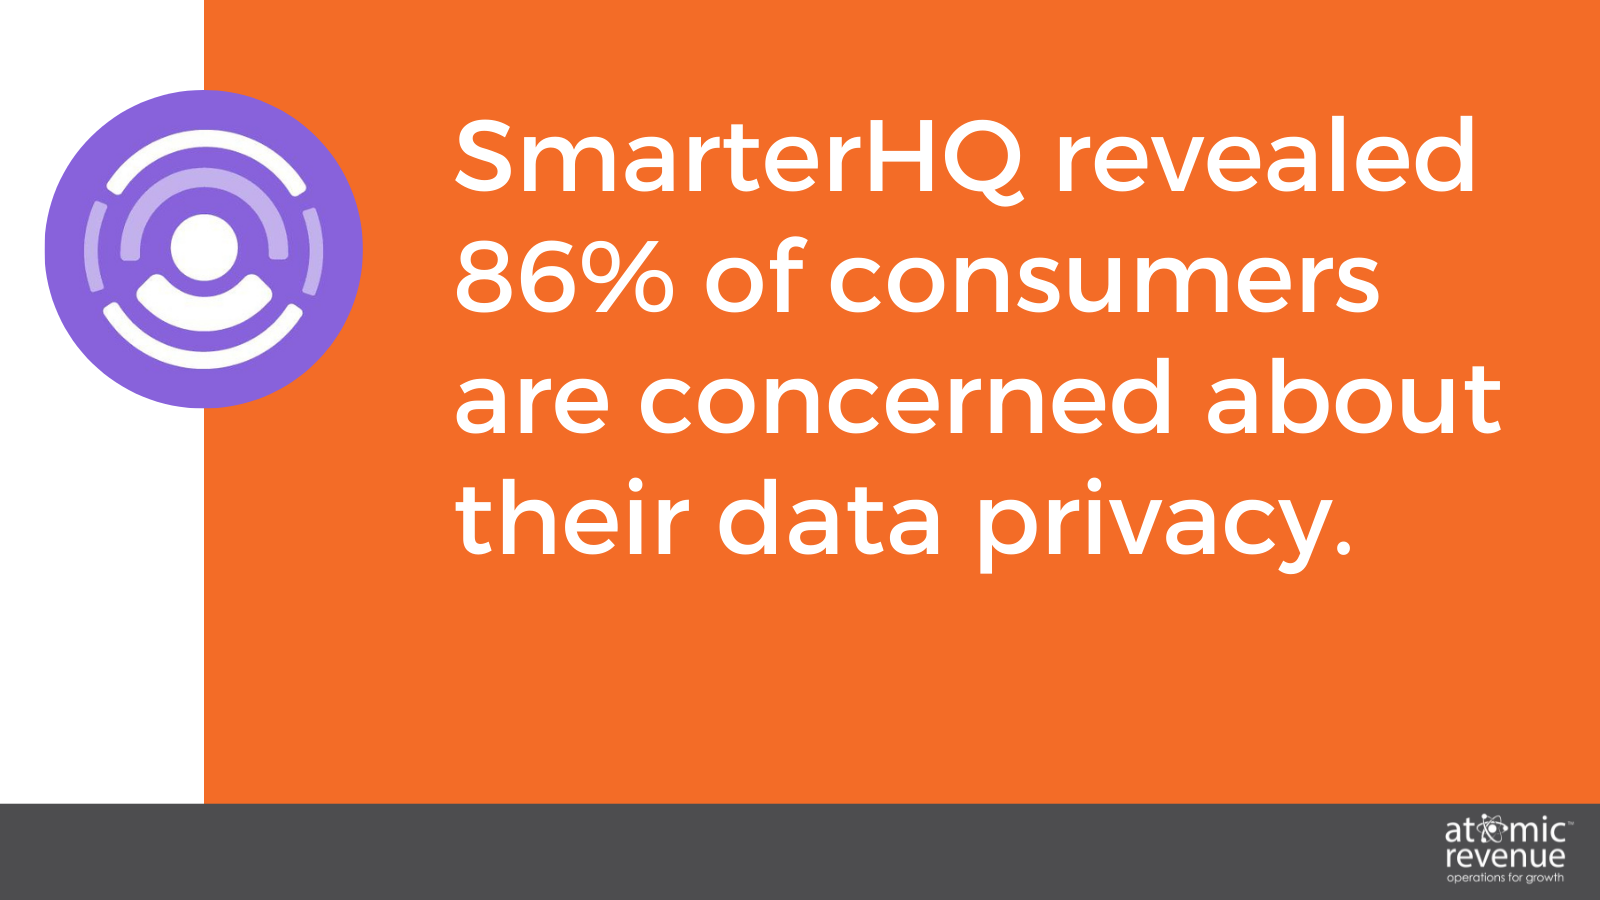 smarterhq 86% of consumers are concerned about data privacy